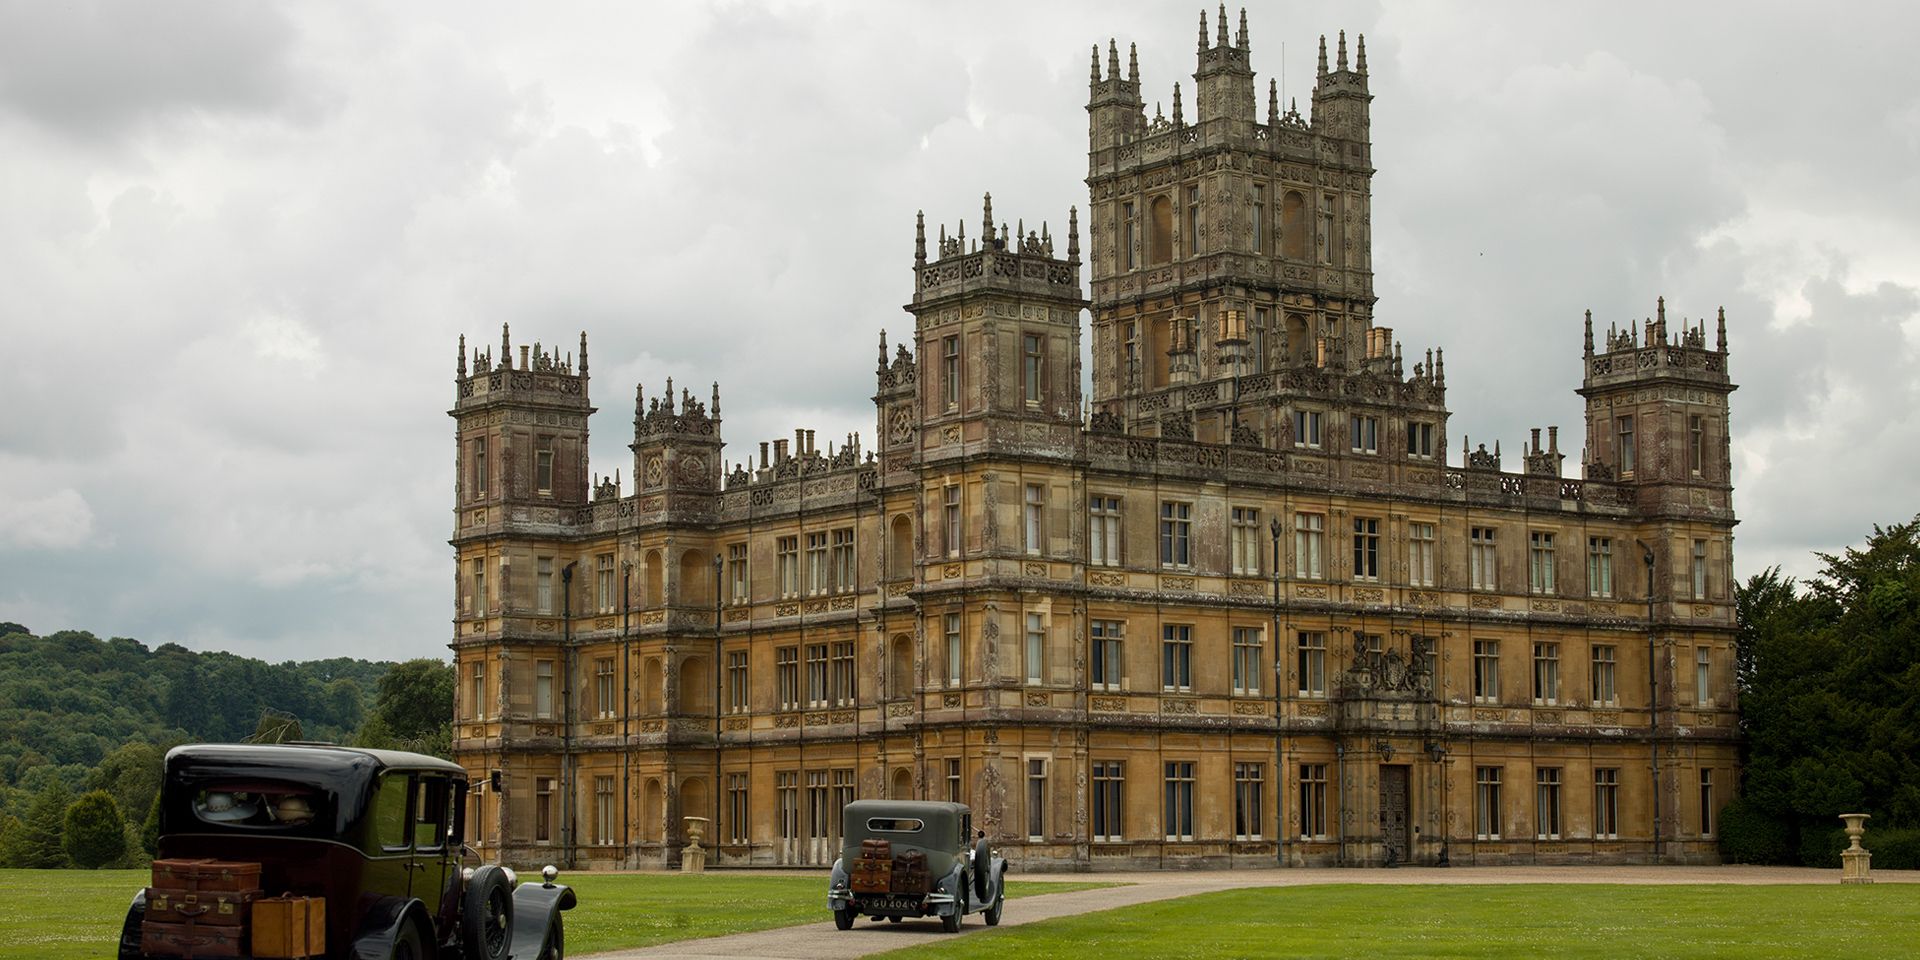 Filming location for the house from Downton Abbey